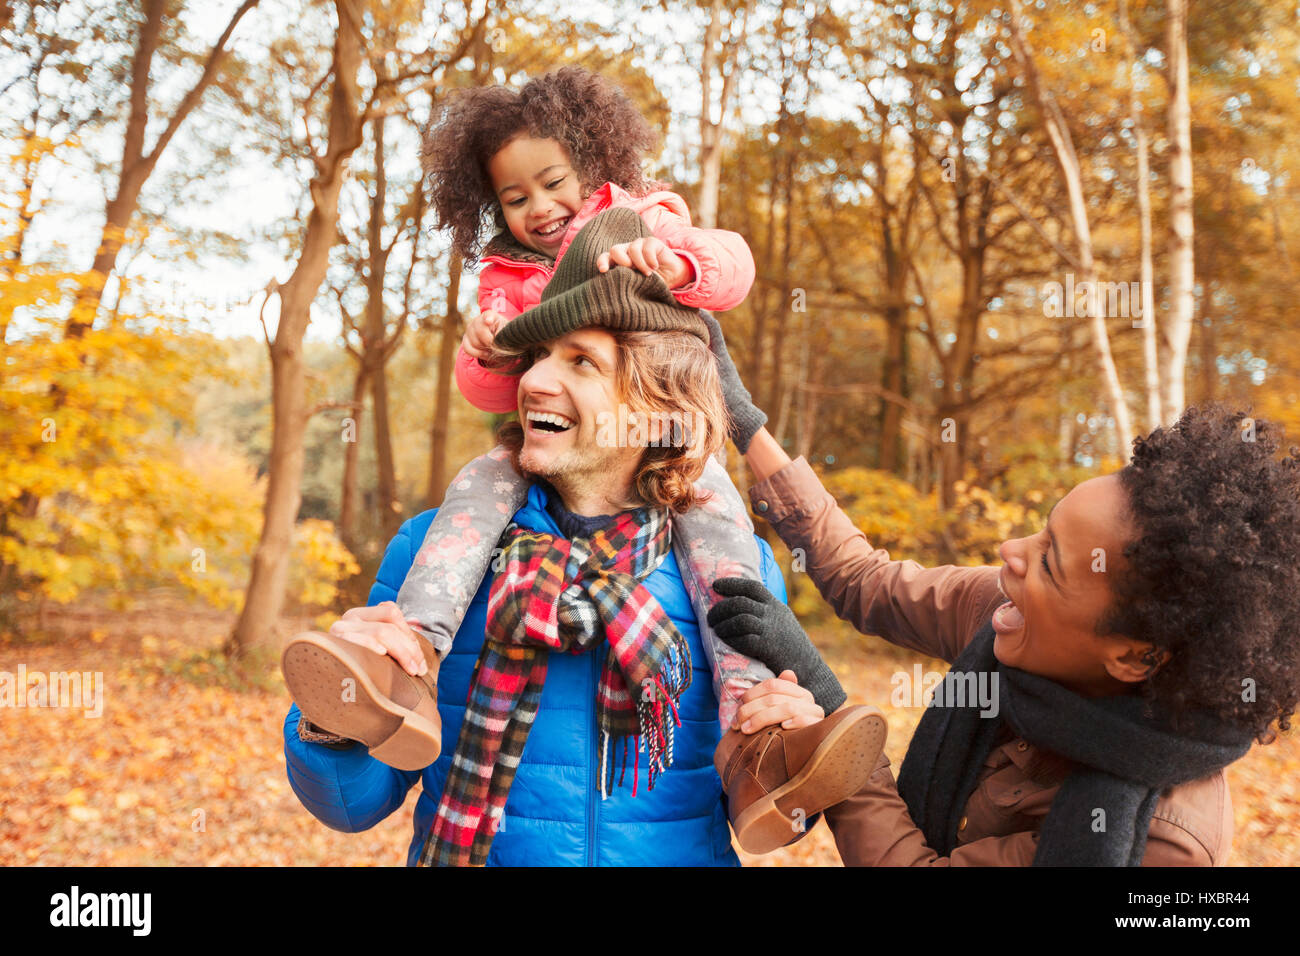 Playful young family in autumn park Stock Photo